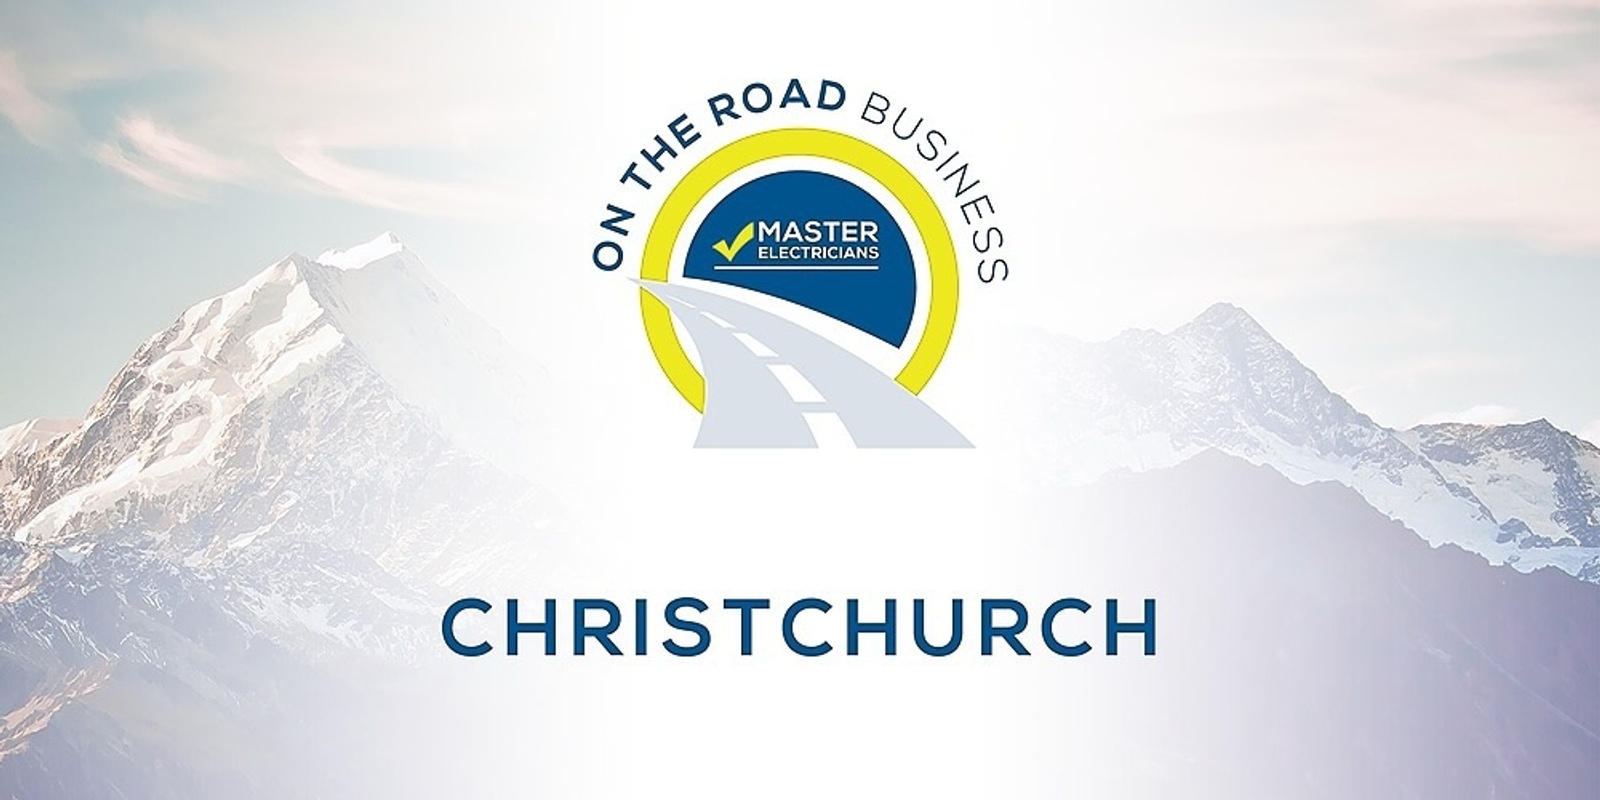 Banner image for On the Road Business - Christchurch